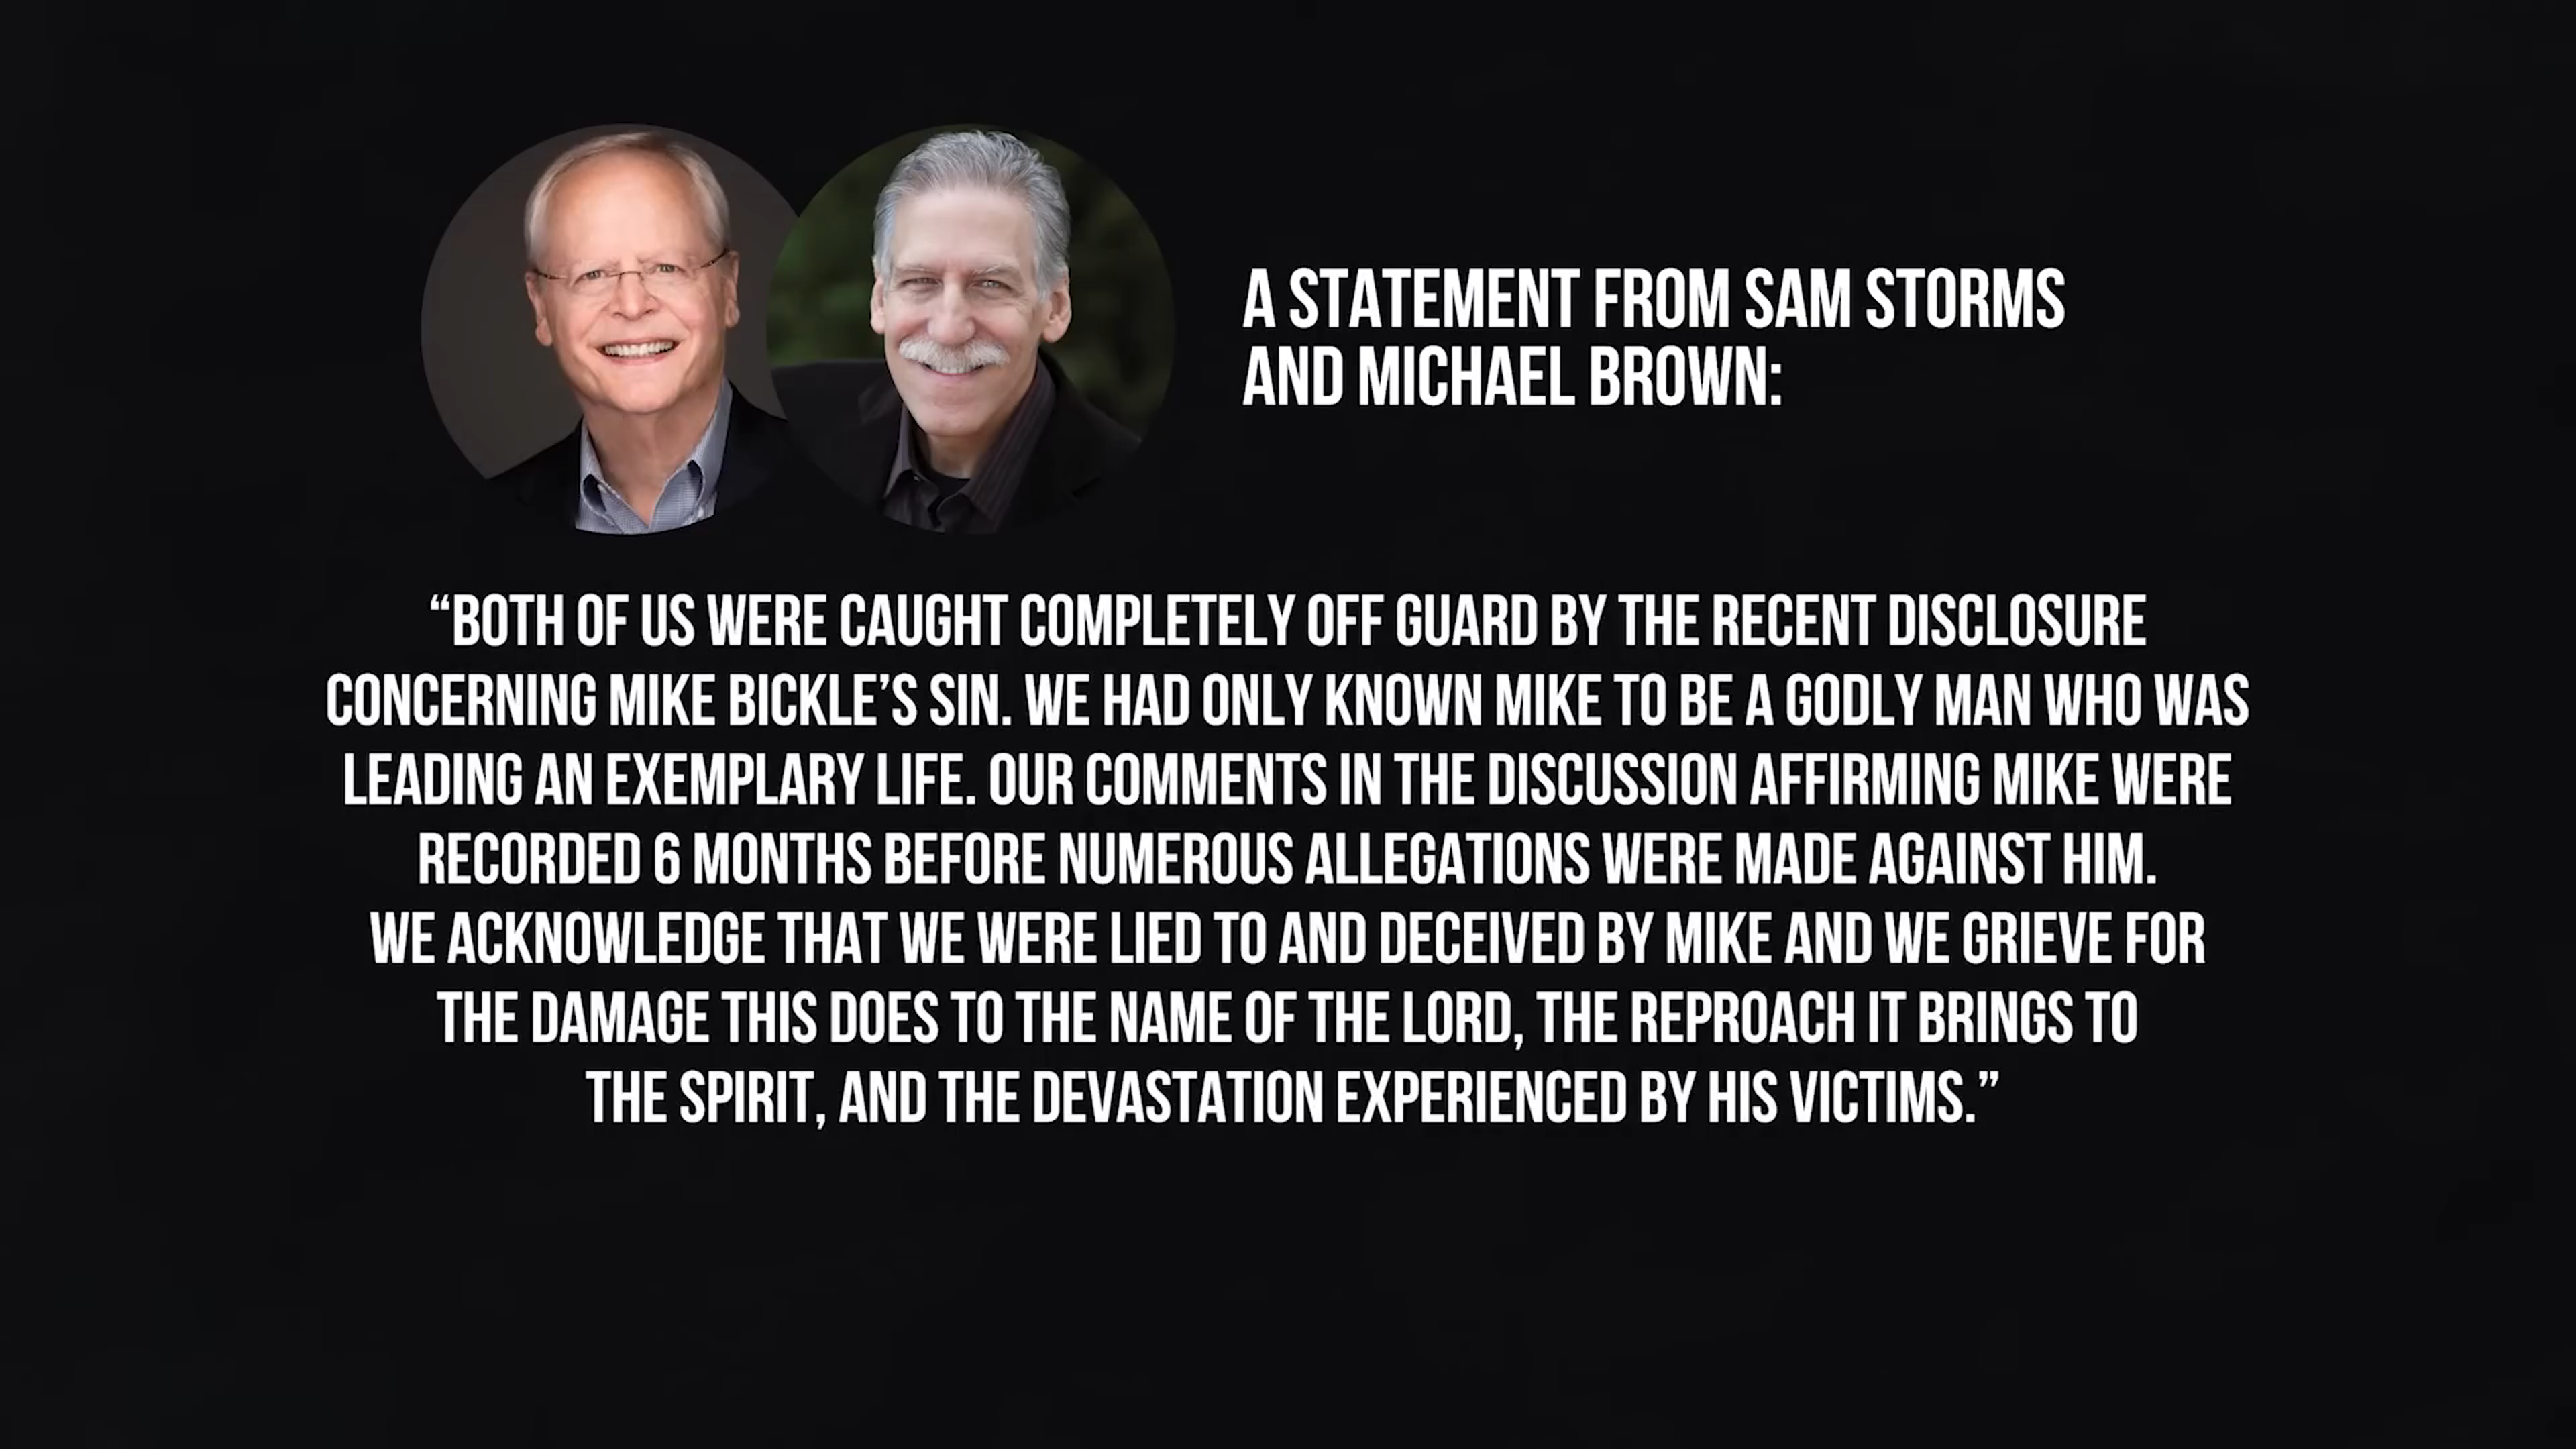 Statement shared on American Gospel Roundtable by Michael Brown And Sam Storms